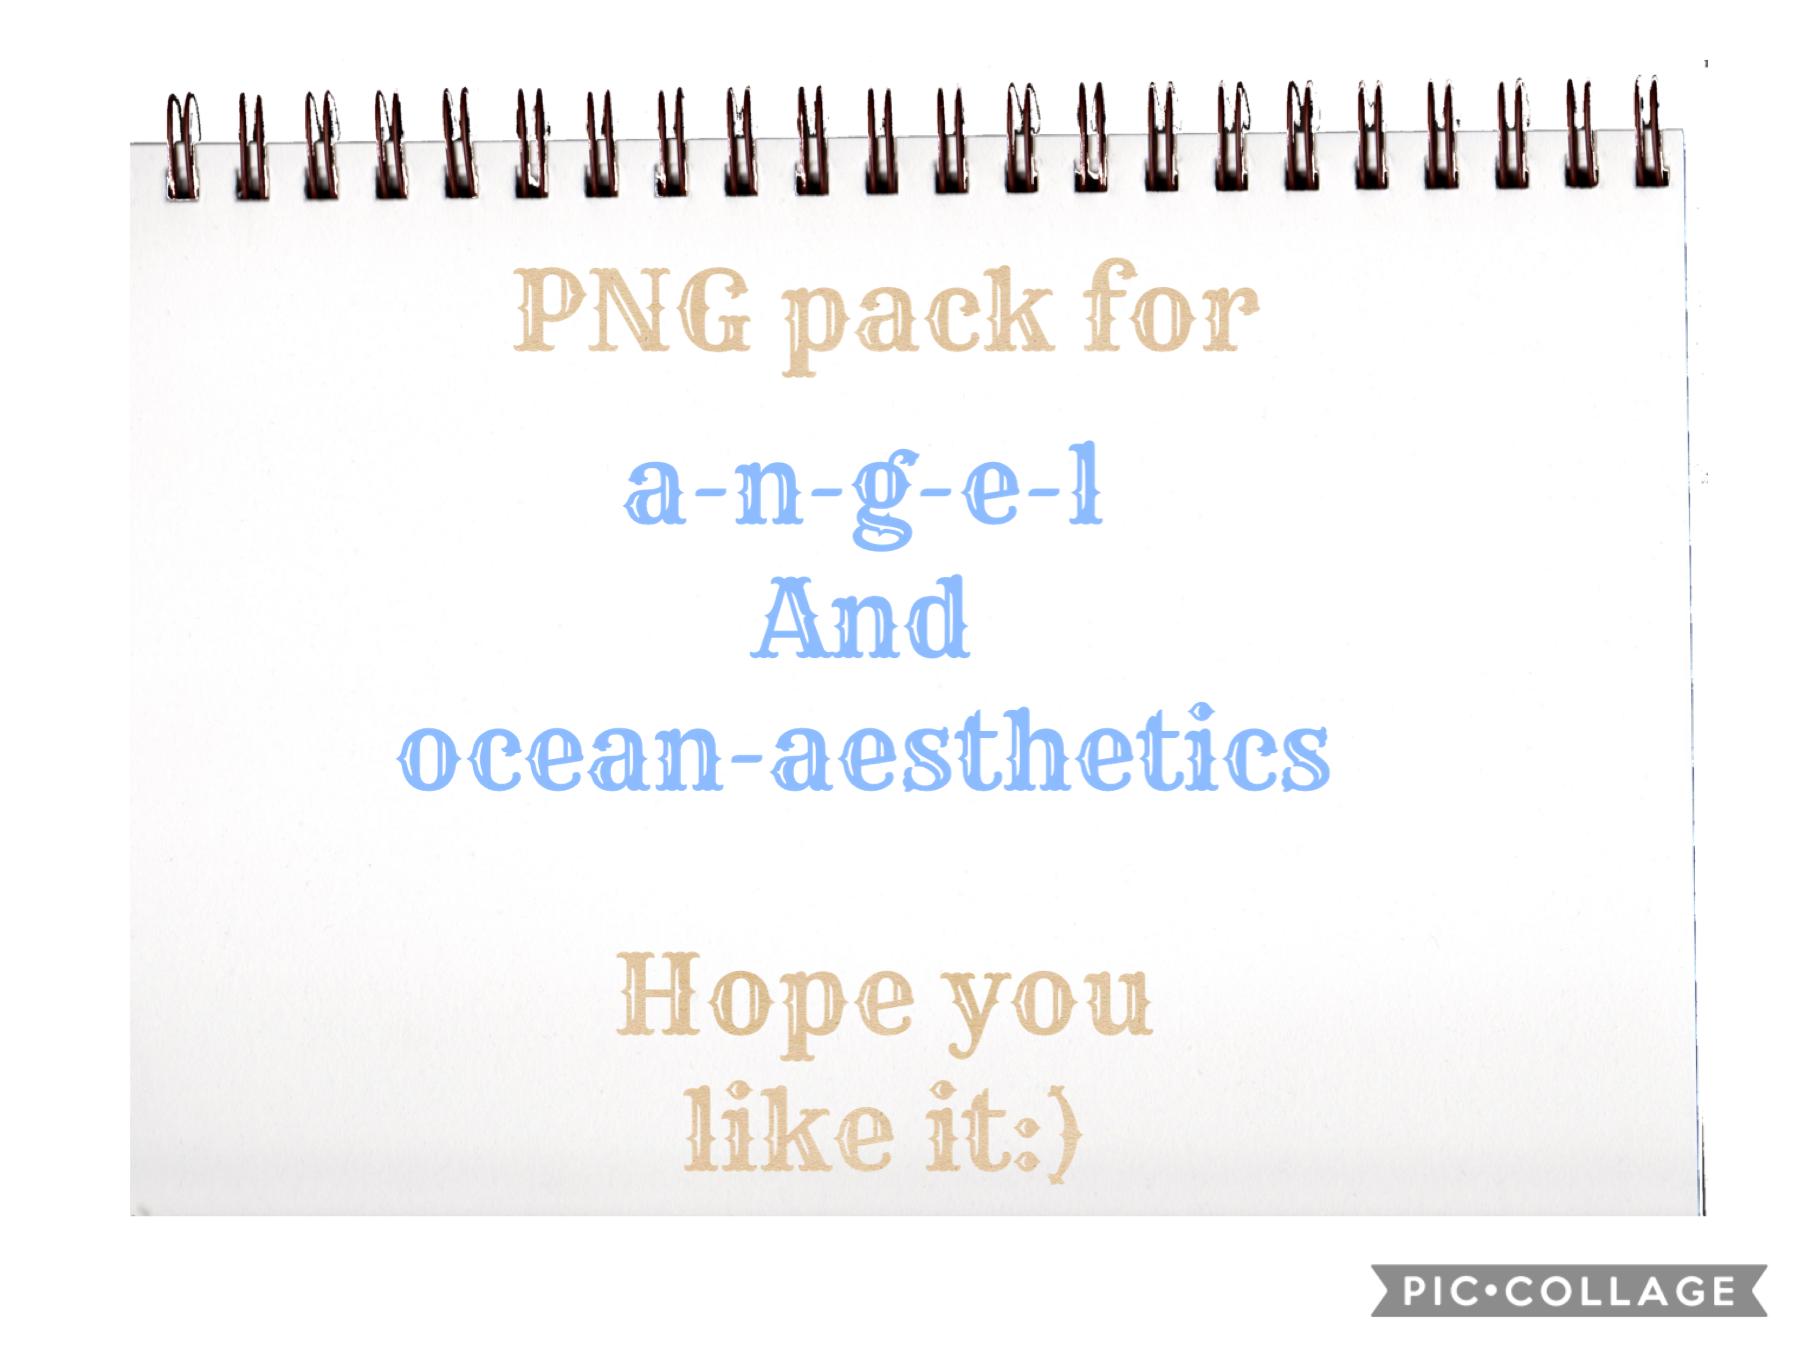 PNG pack for angel and ocean-aesthetics hope you guys like it!
